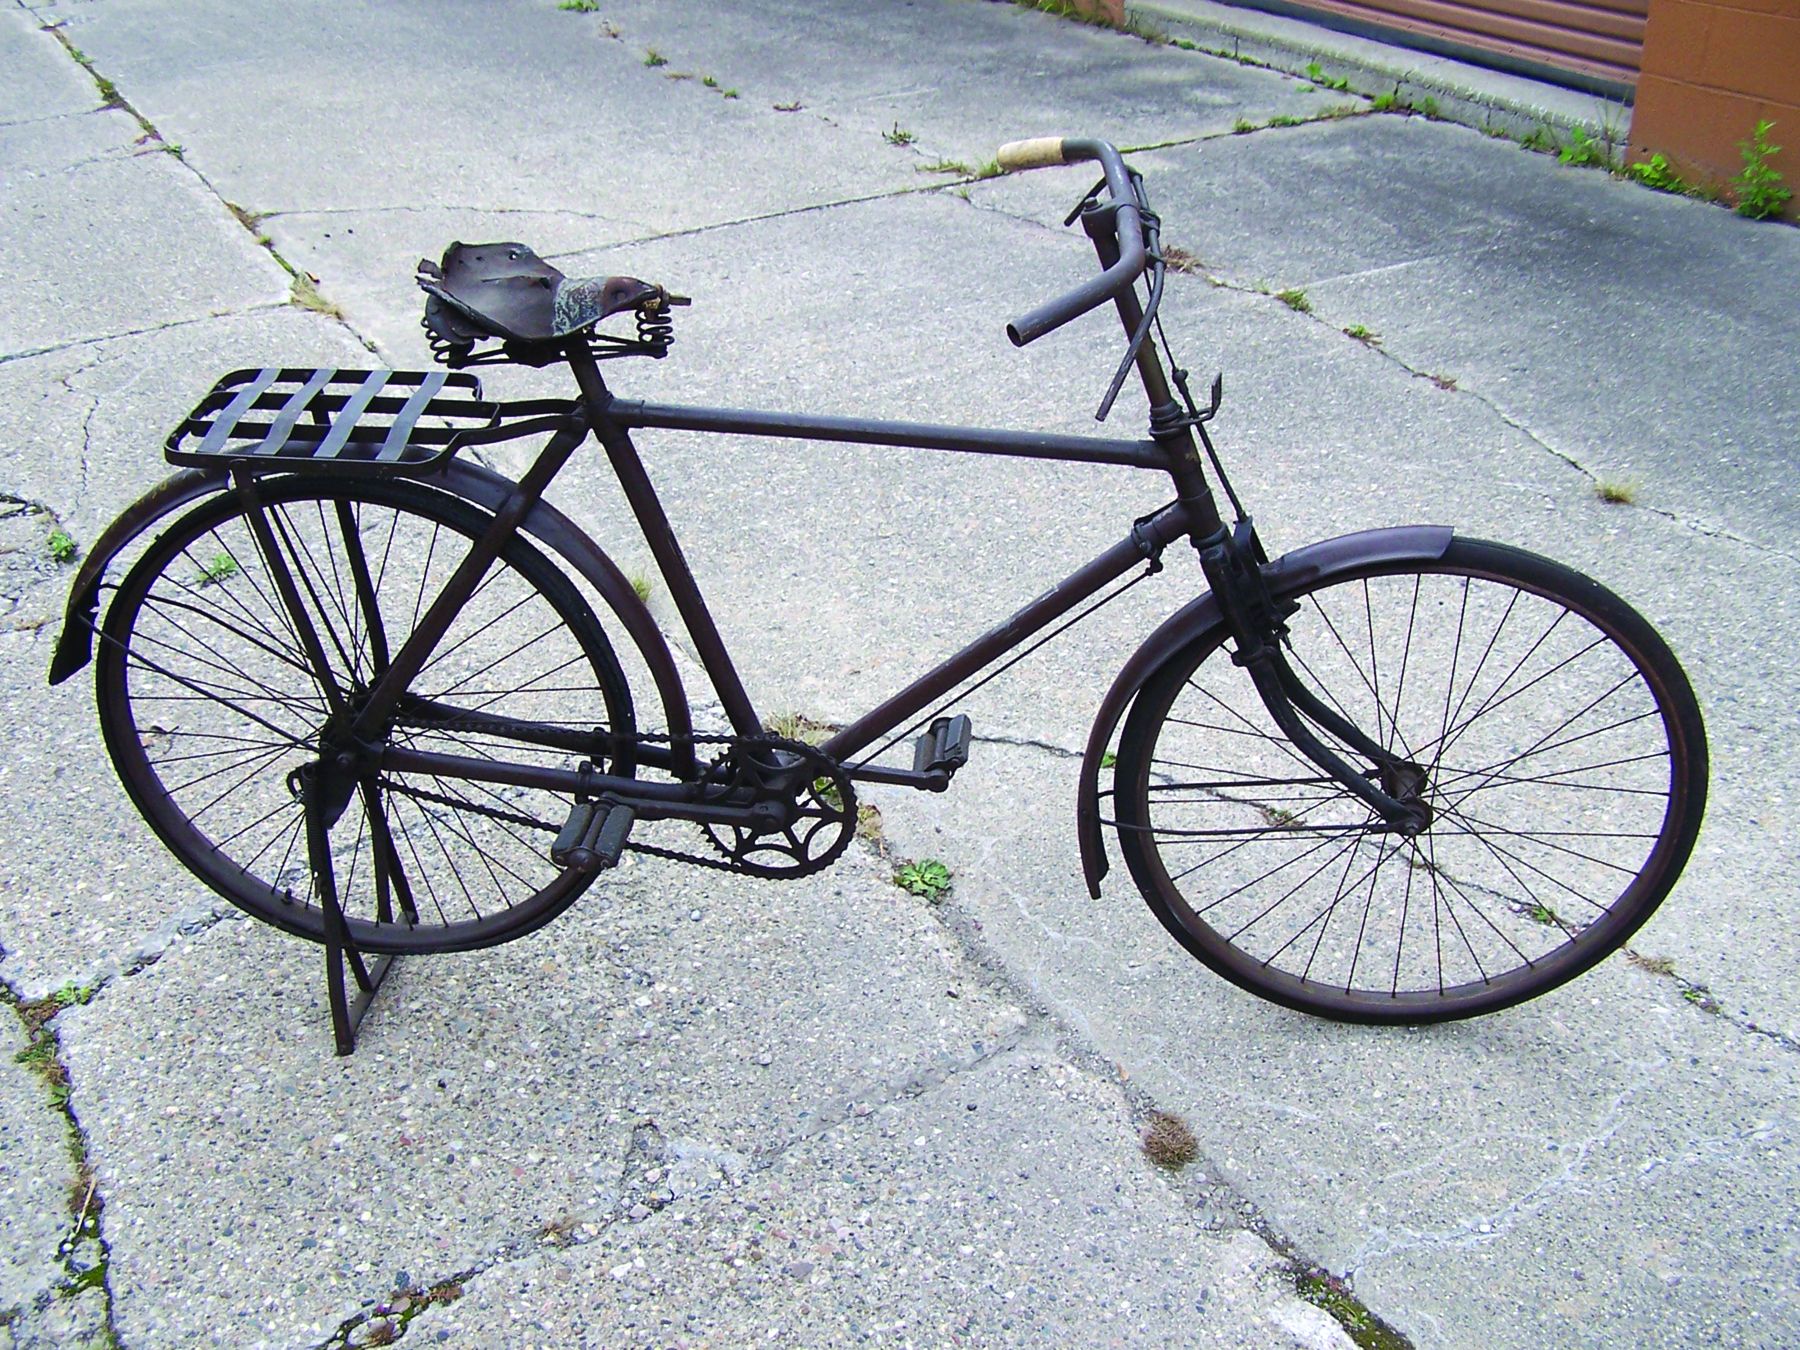 An extremely rare example of a Japanese military bike from World War II. Even those in only fair condition are prized by contemporary collectors.